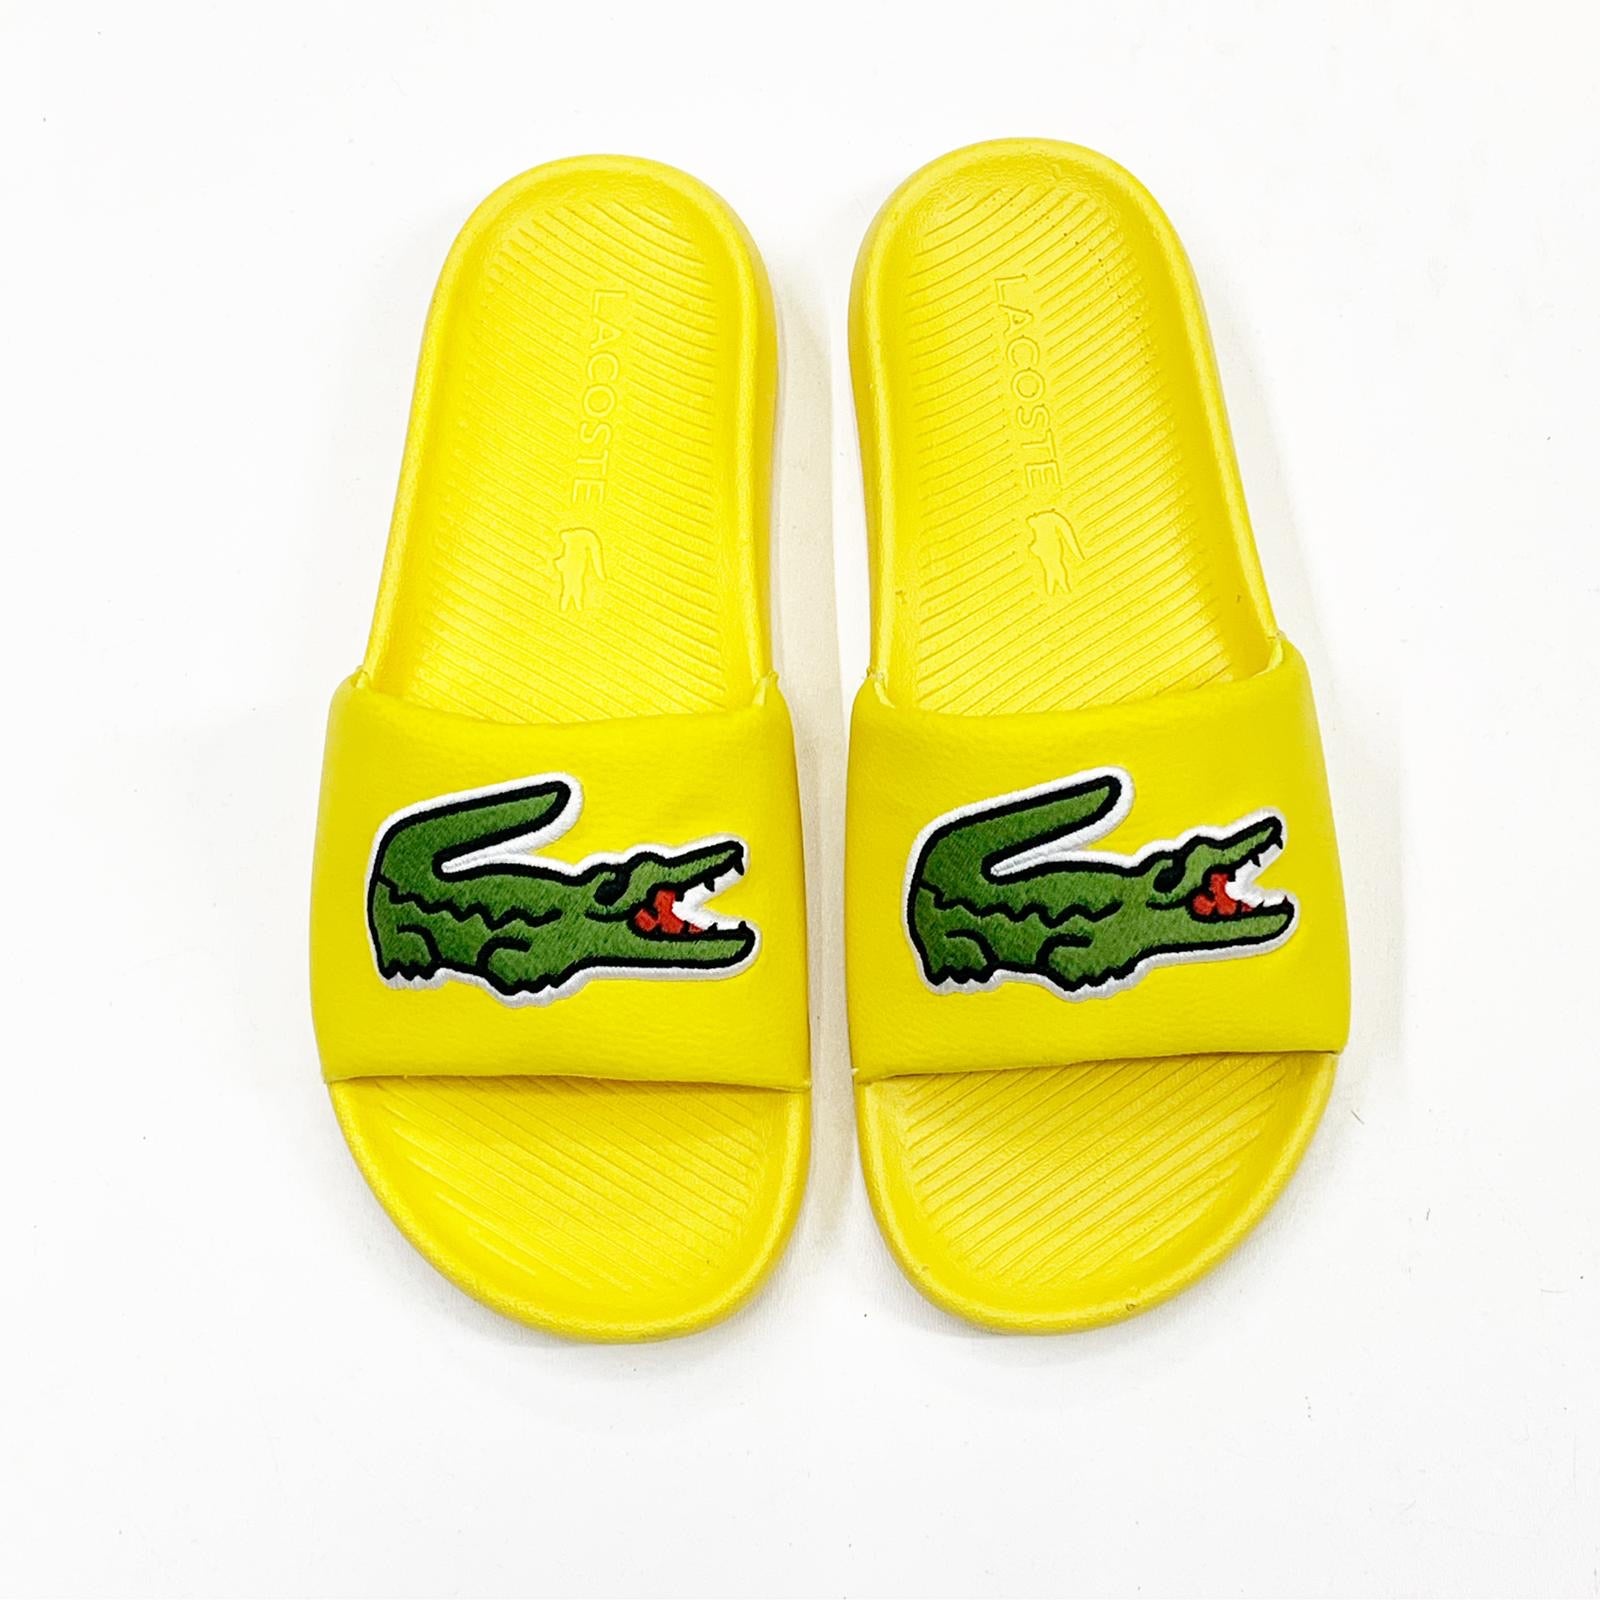 Lacoste (men’s yellow/green croc slides) – Vip Clothing Stores